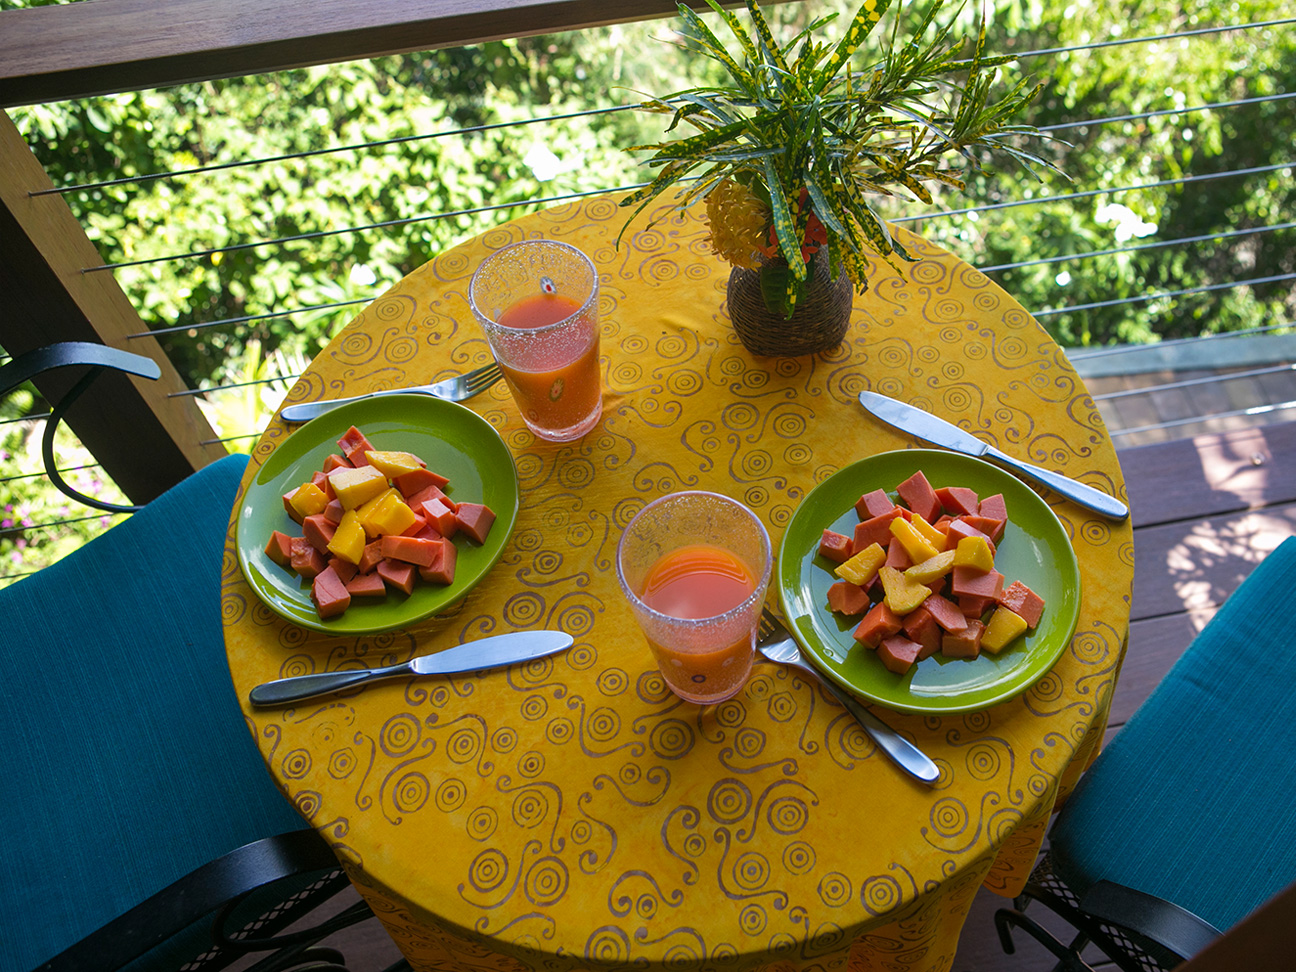 Fresh Fruits Compliment The Natural Surroundings Of This Lovely St. John Cottage